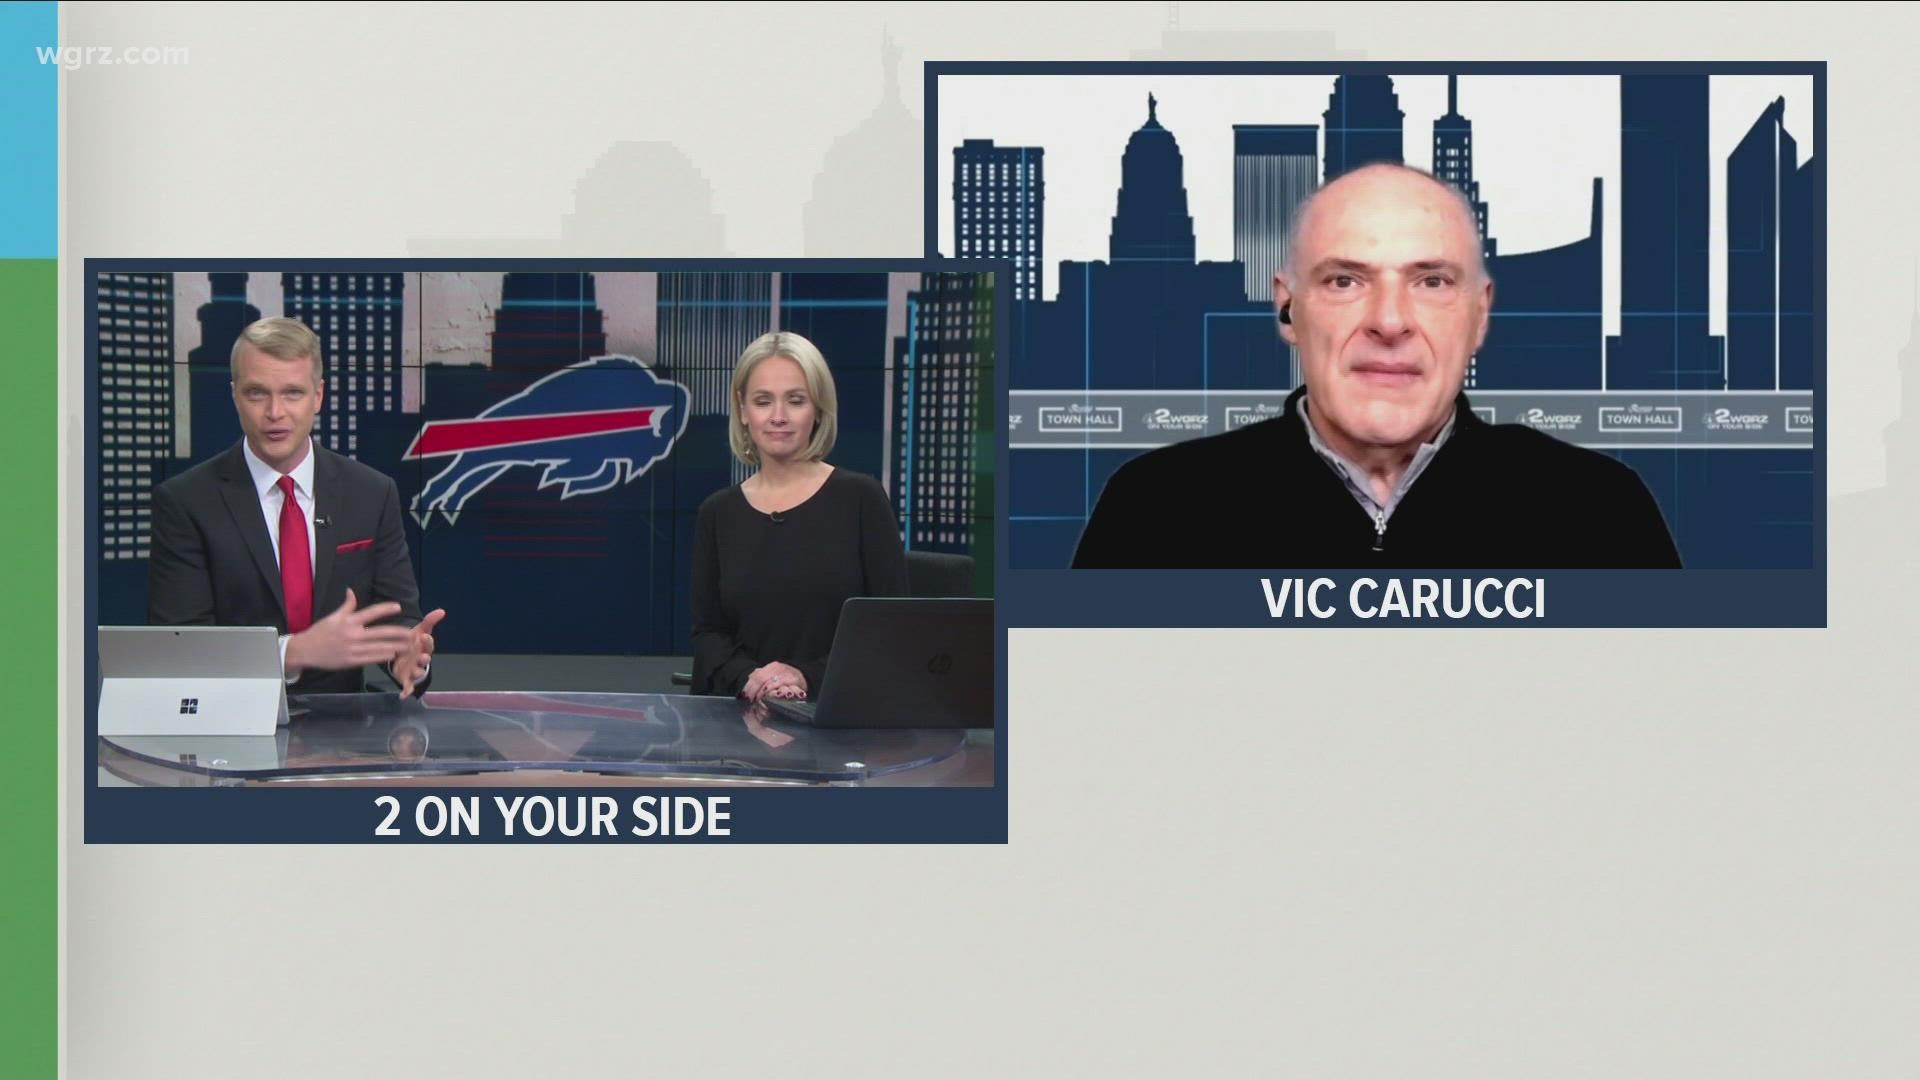 Vic Carucci answers some of your questions about one of the most important games on the schedule.